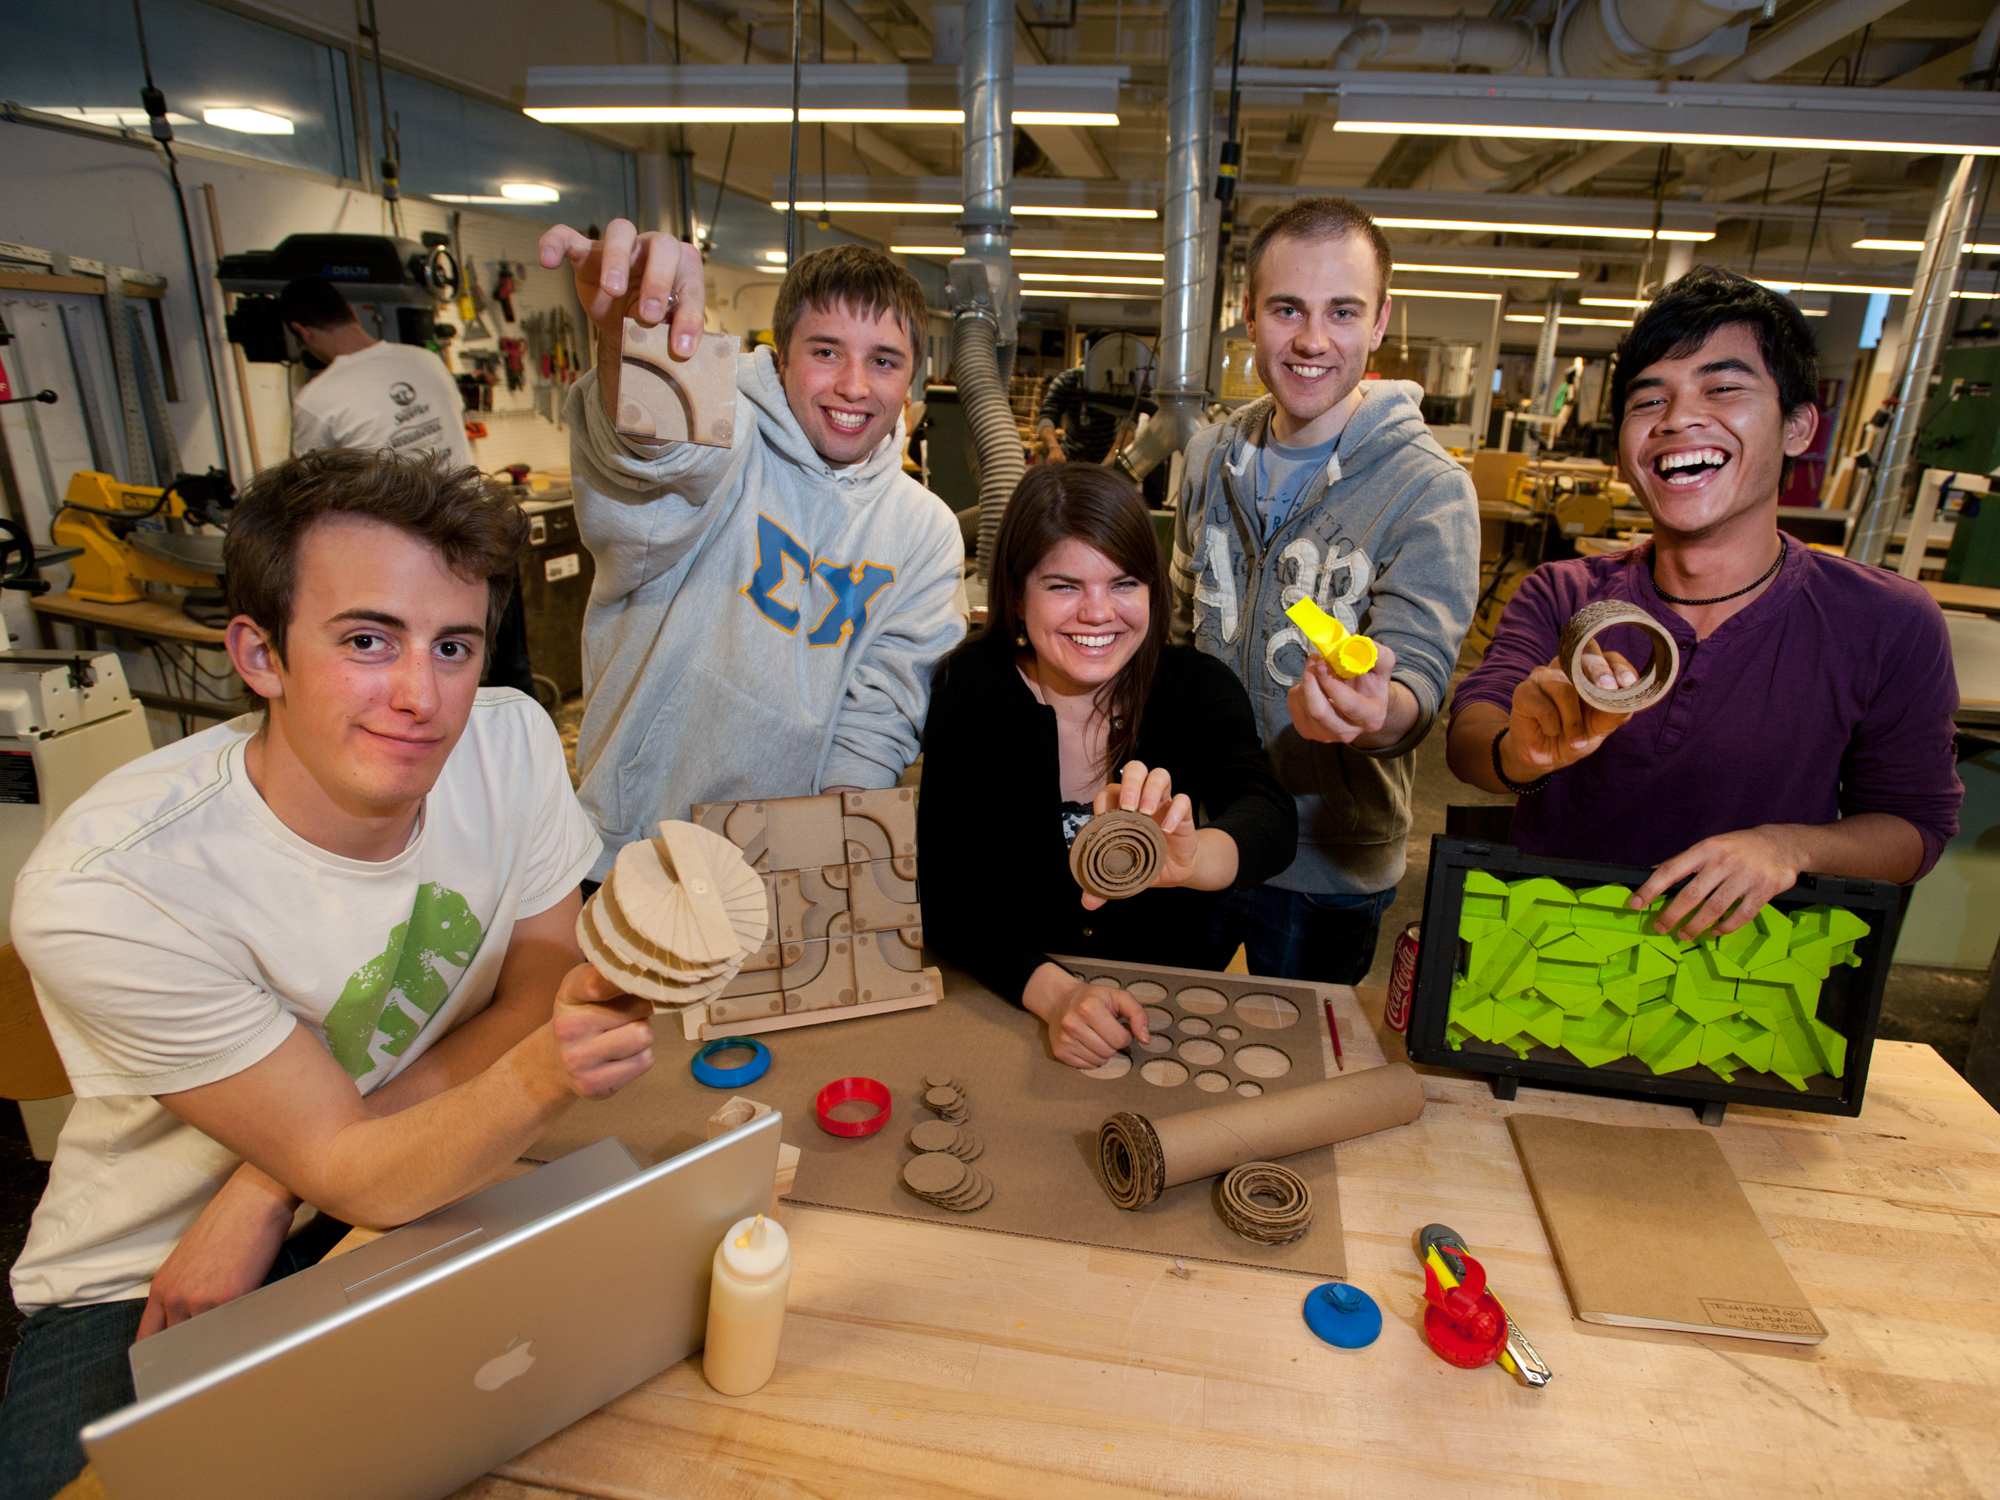 Product design students show off their toy product design prototypes